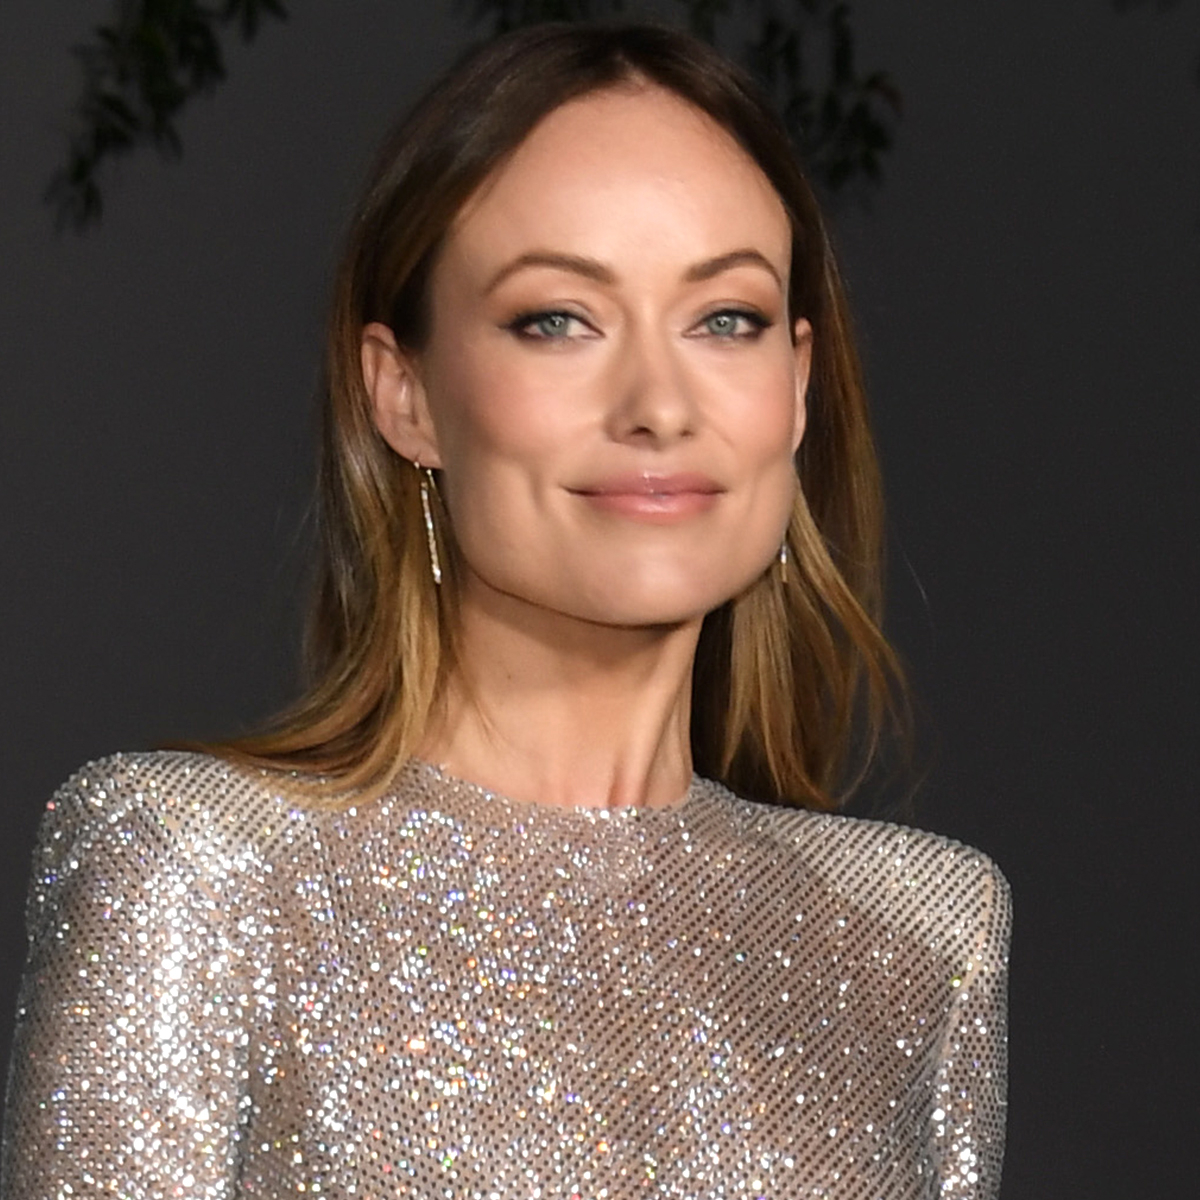 Celeb Look For Less, Olivia Wilde